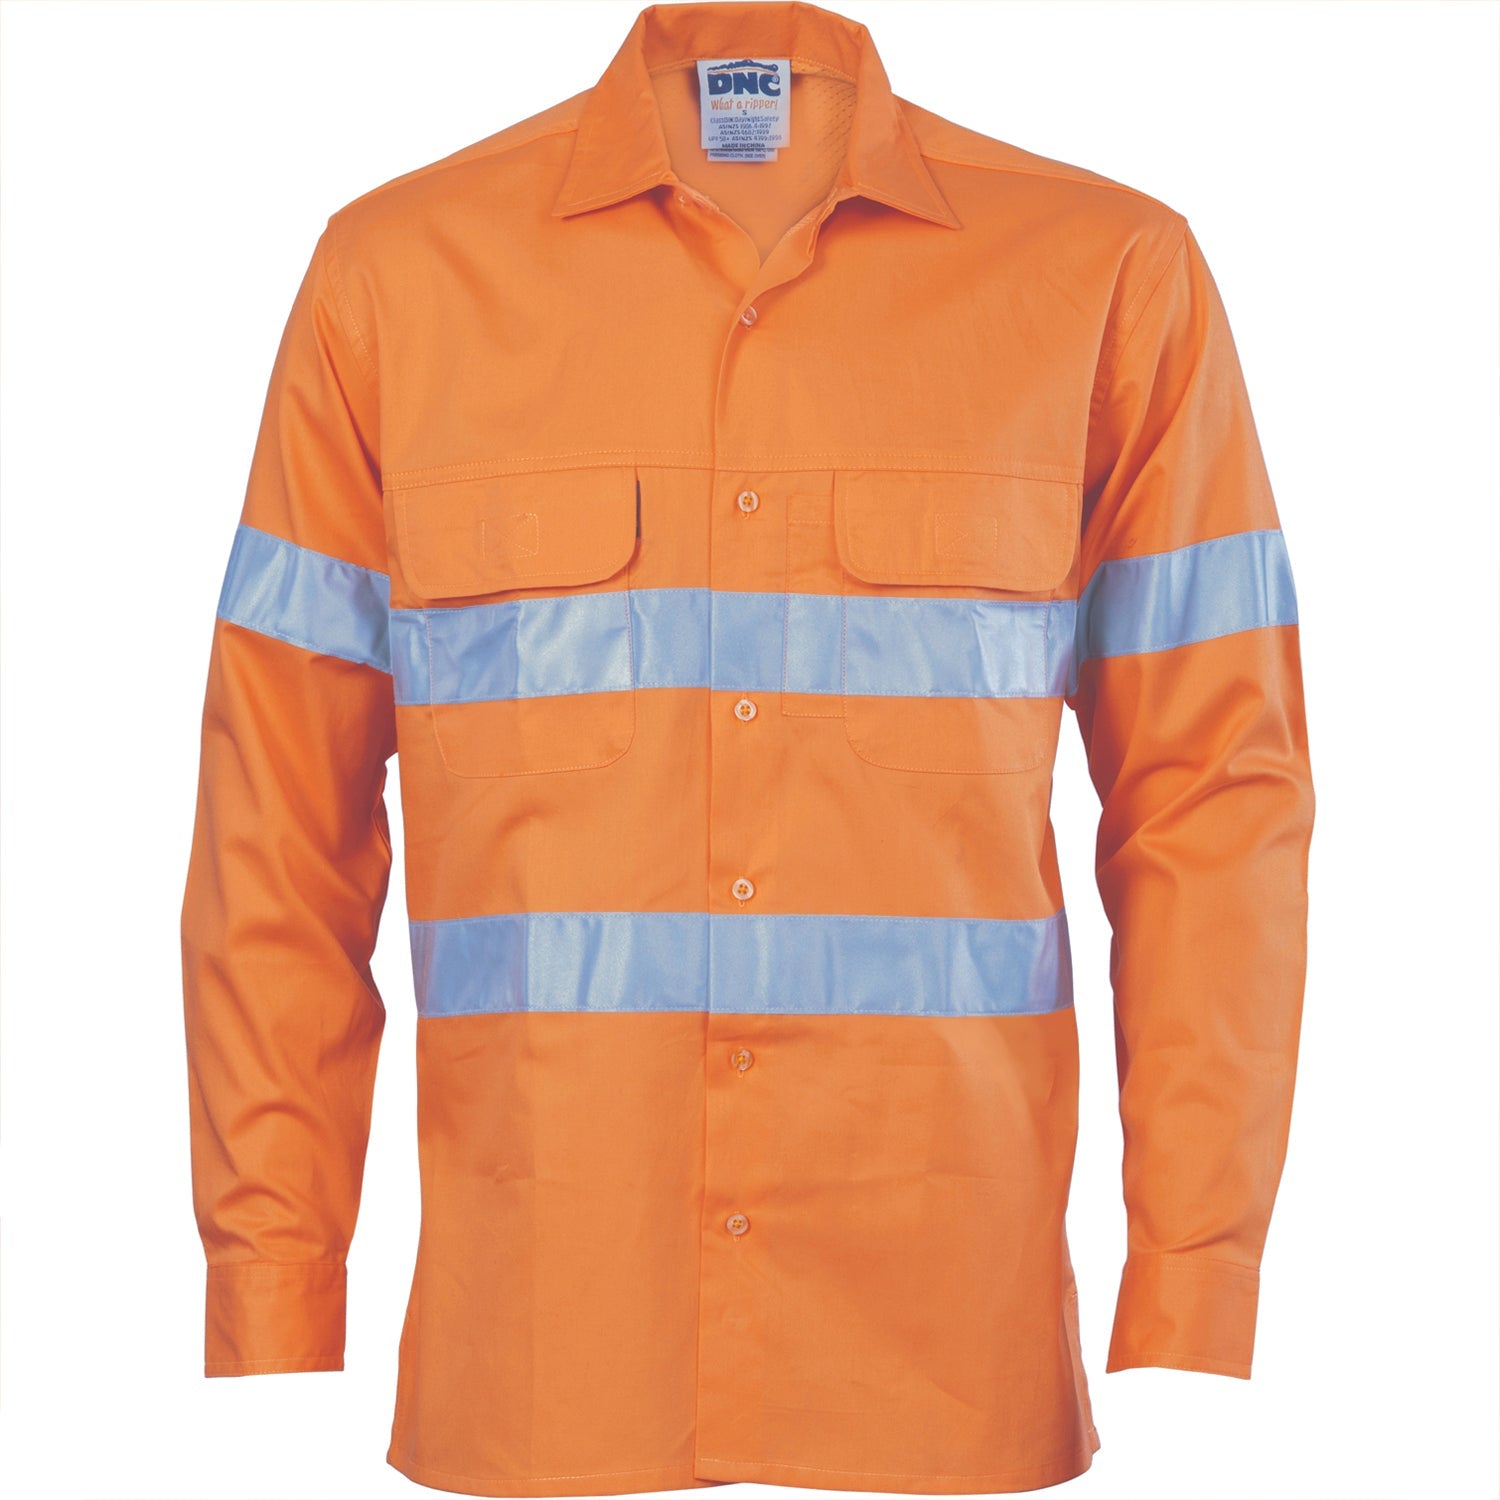 Dnc 3947 Hivis 3 Way Cool-breeze Cotton Shirt With 3mr/tape - Long Sleeve